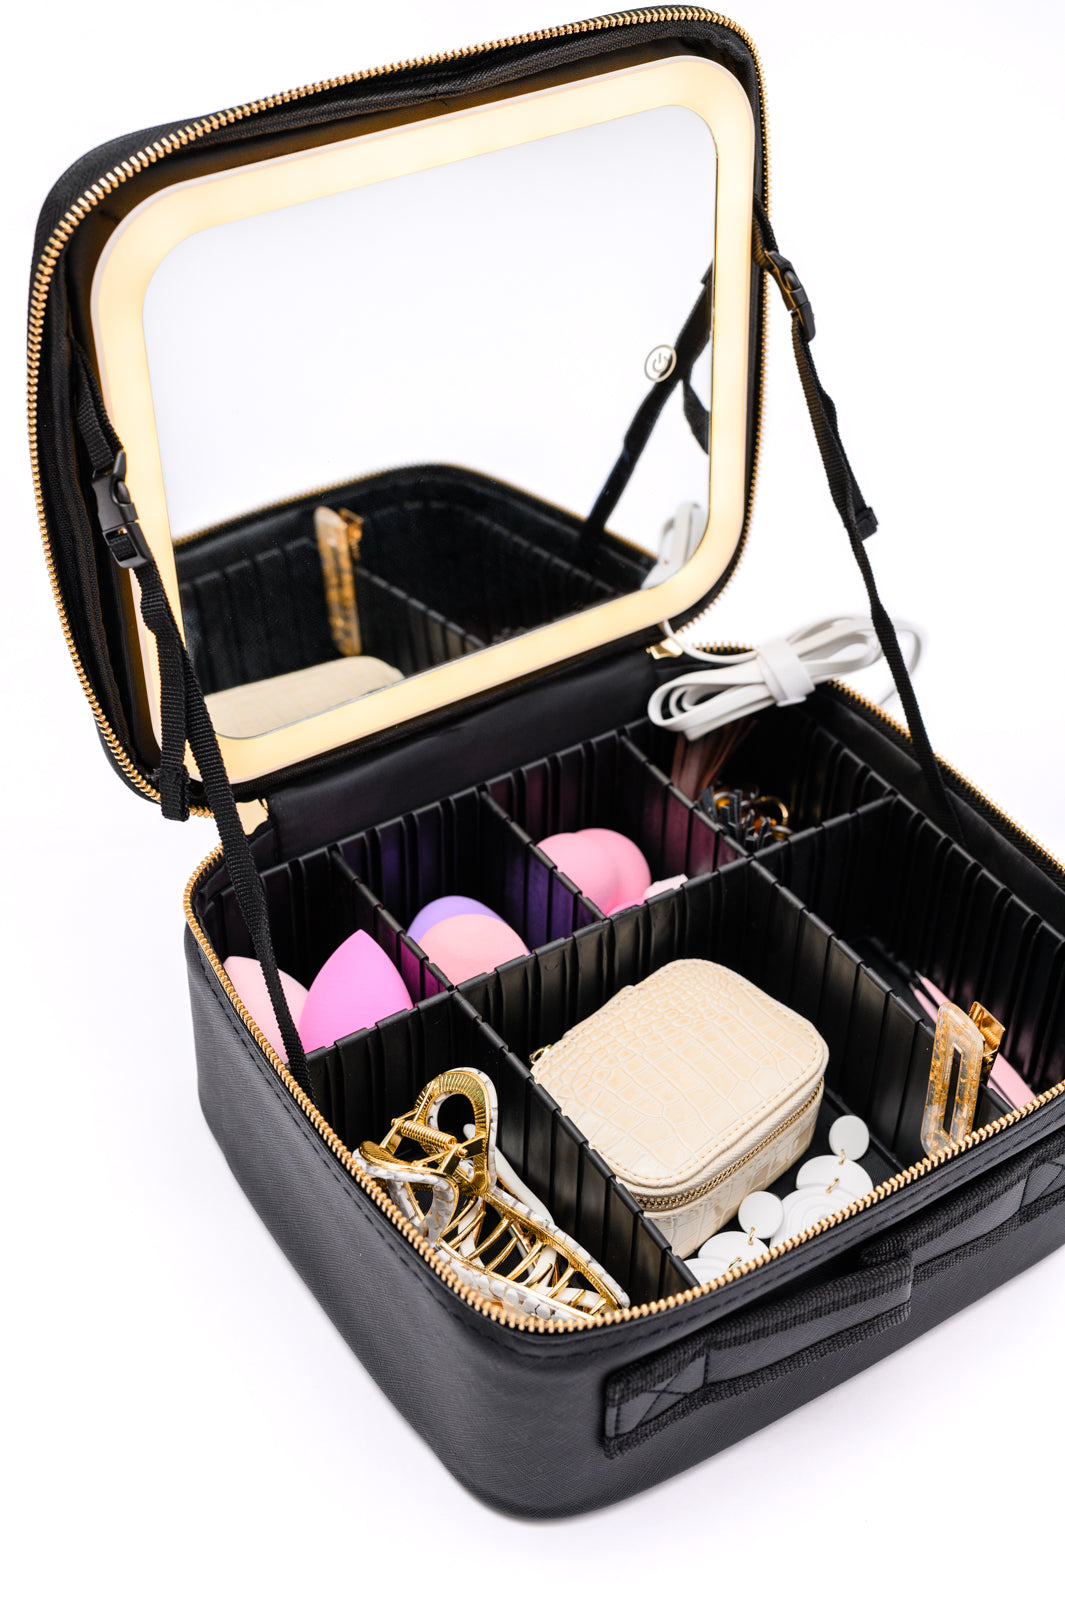 She's All That LED Makeup Case in Black